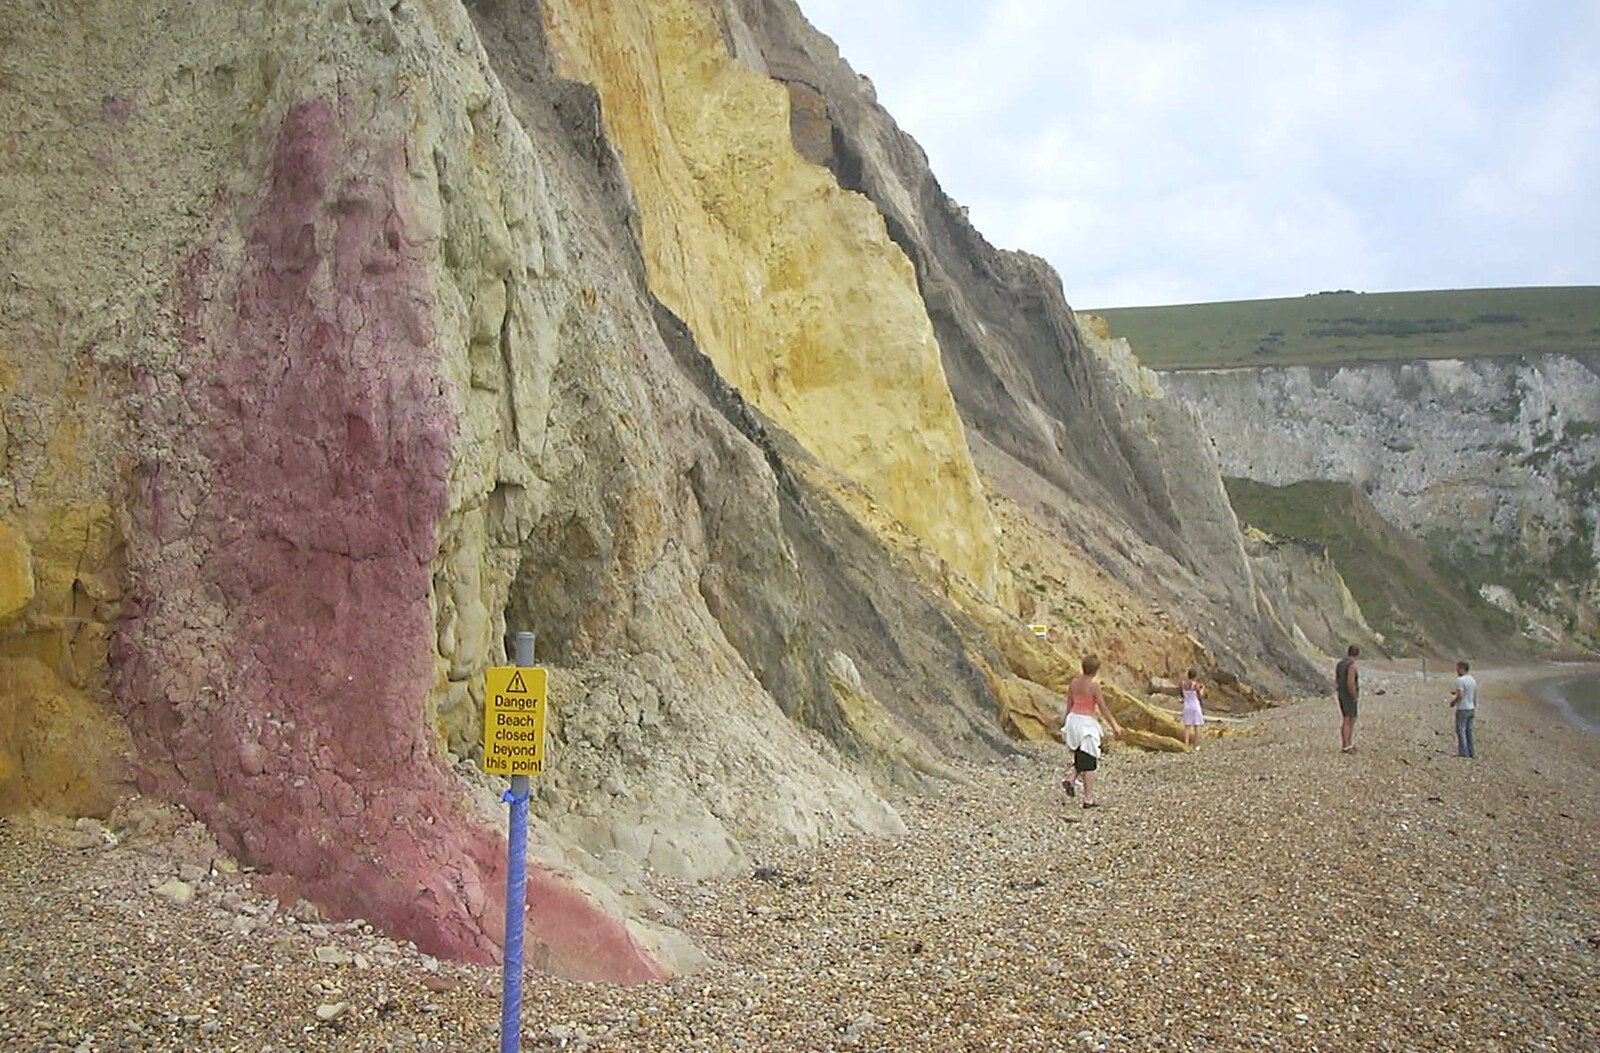 The famous multi-coloured sands of Alum Bay from Cowes Weekend, Cowes, Isle of Wight - 7th August 2004